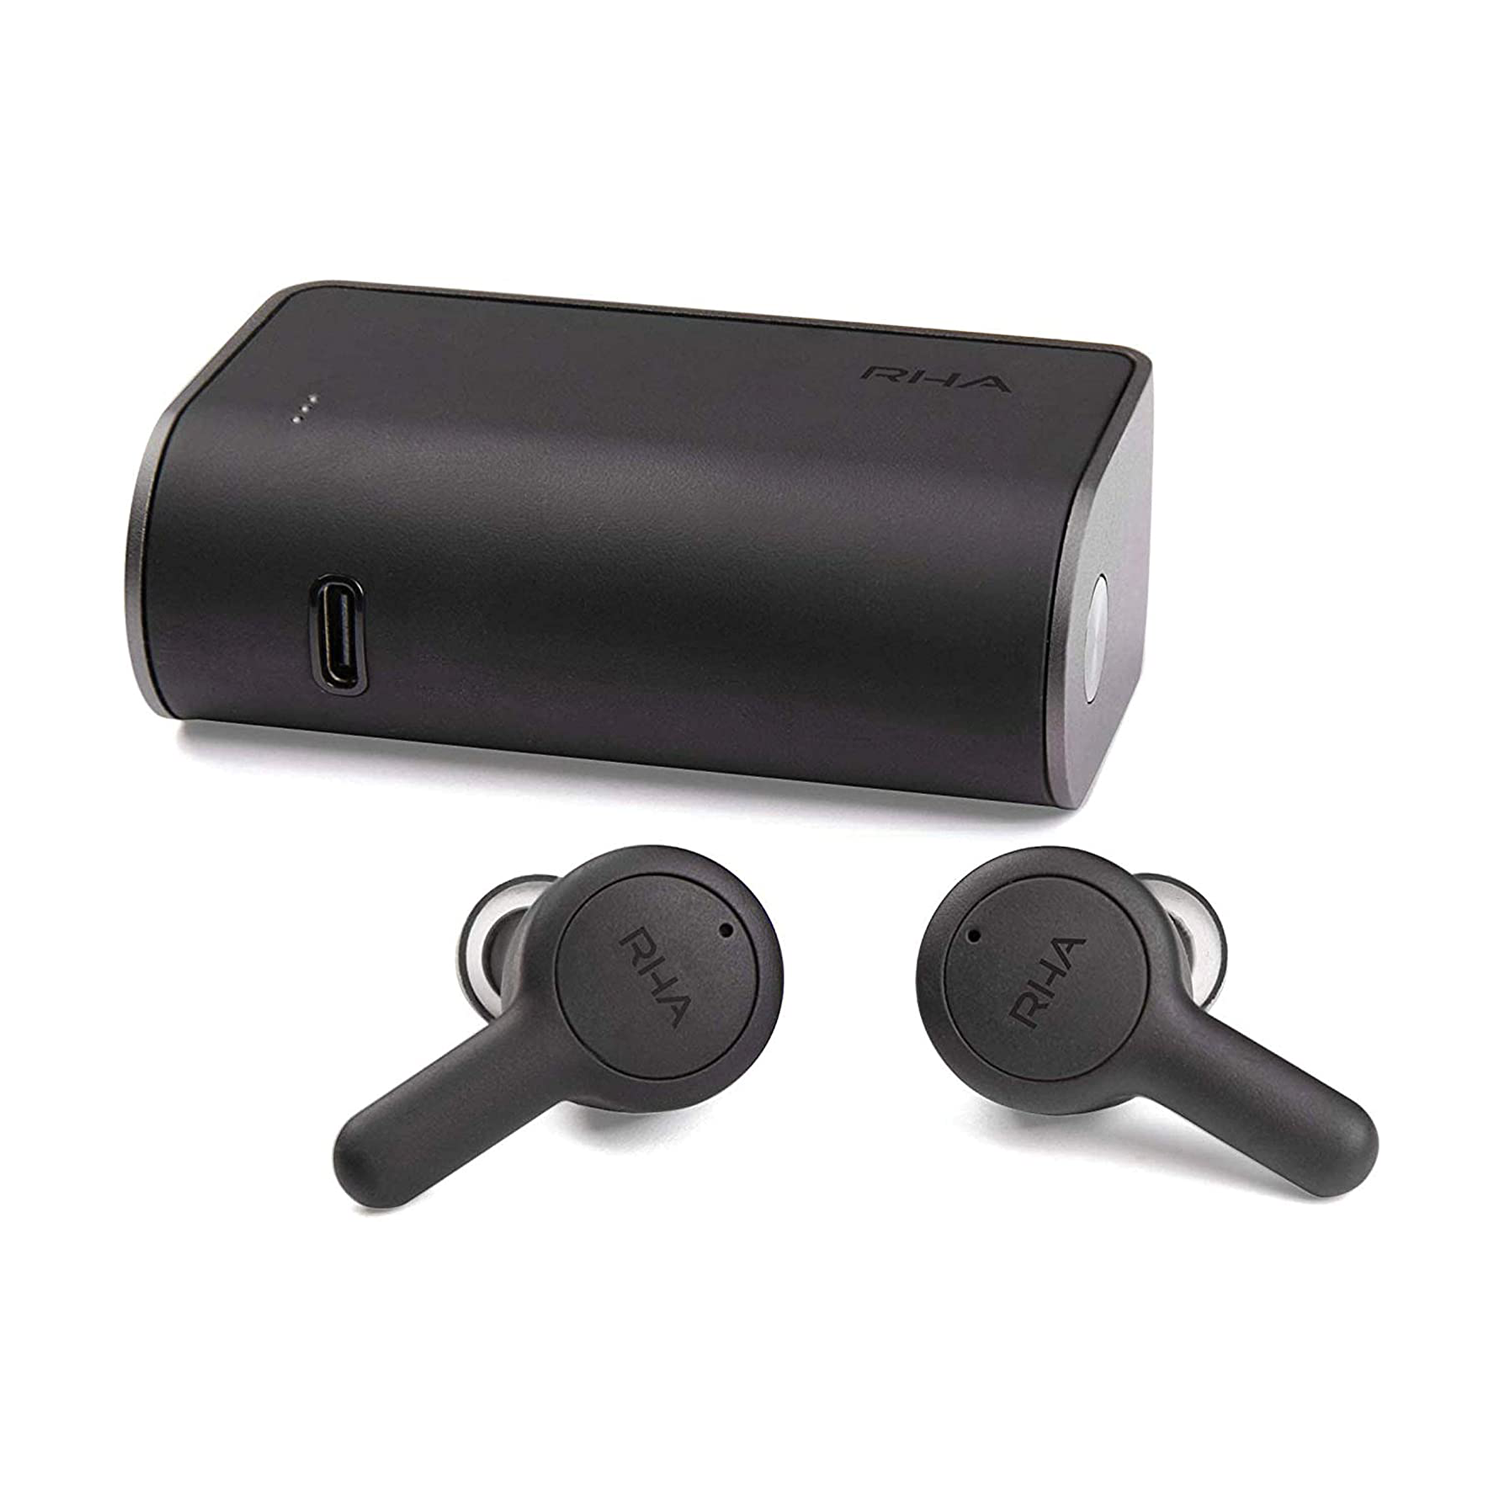 RHA TrueConnect: True Wireless Earbuds with Bluetooth 5 & Sweatproof for Sport Activity, Carbon Black, One Size